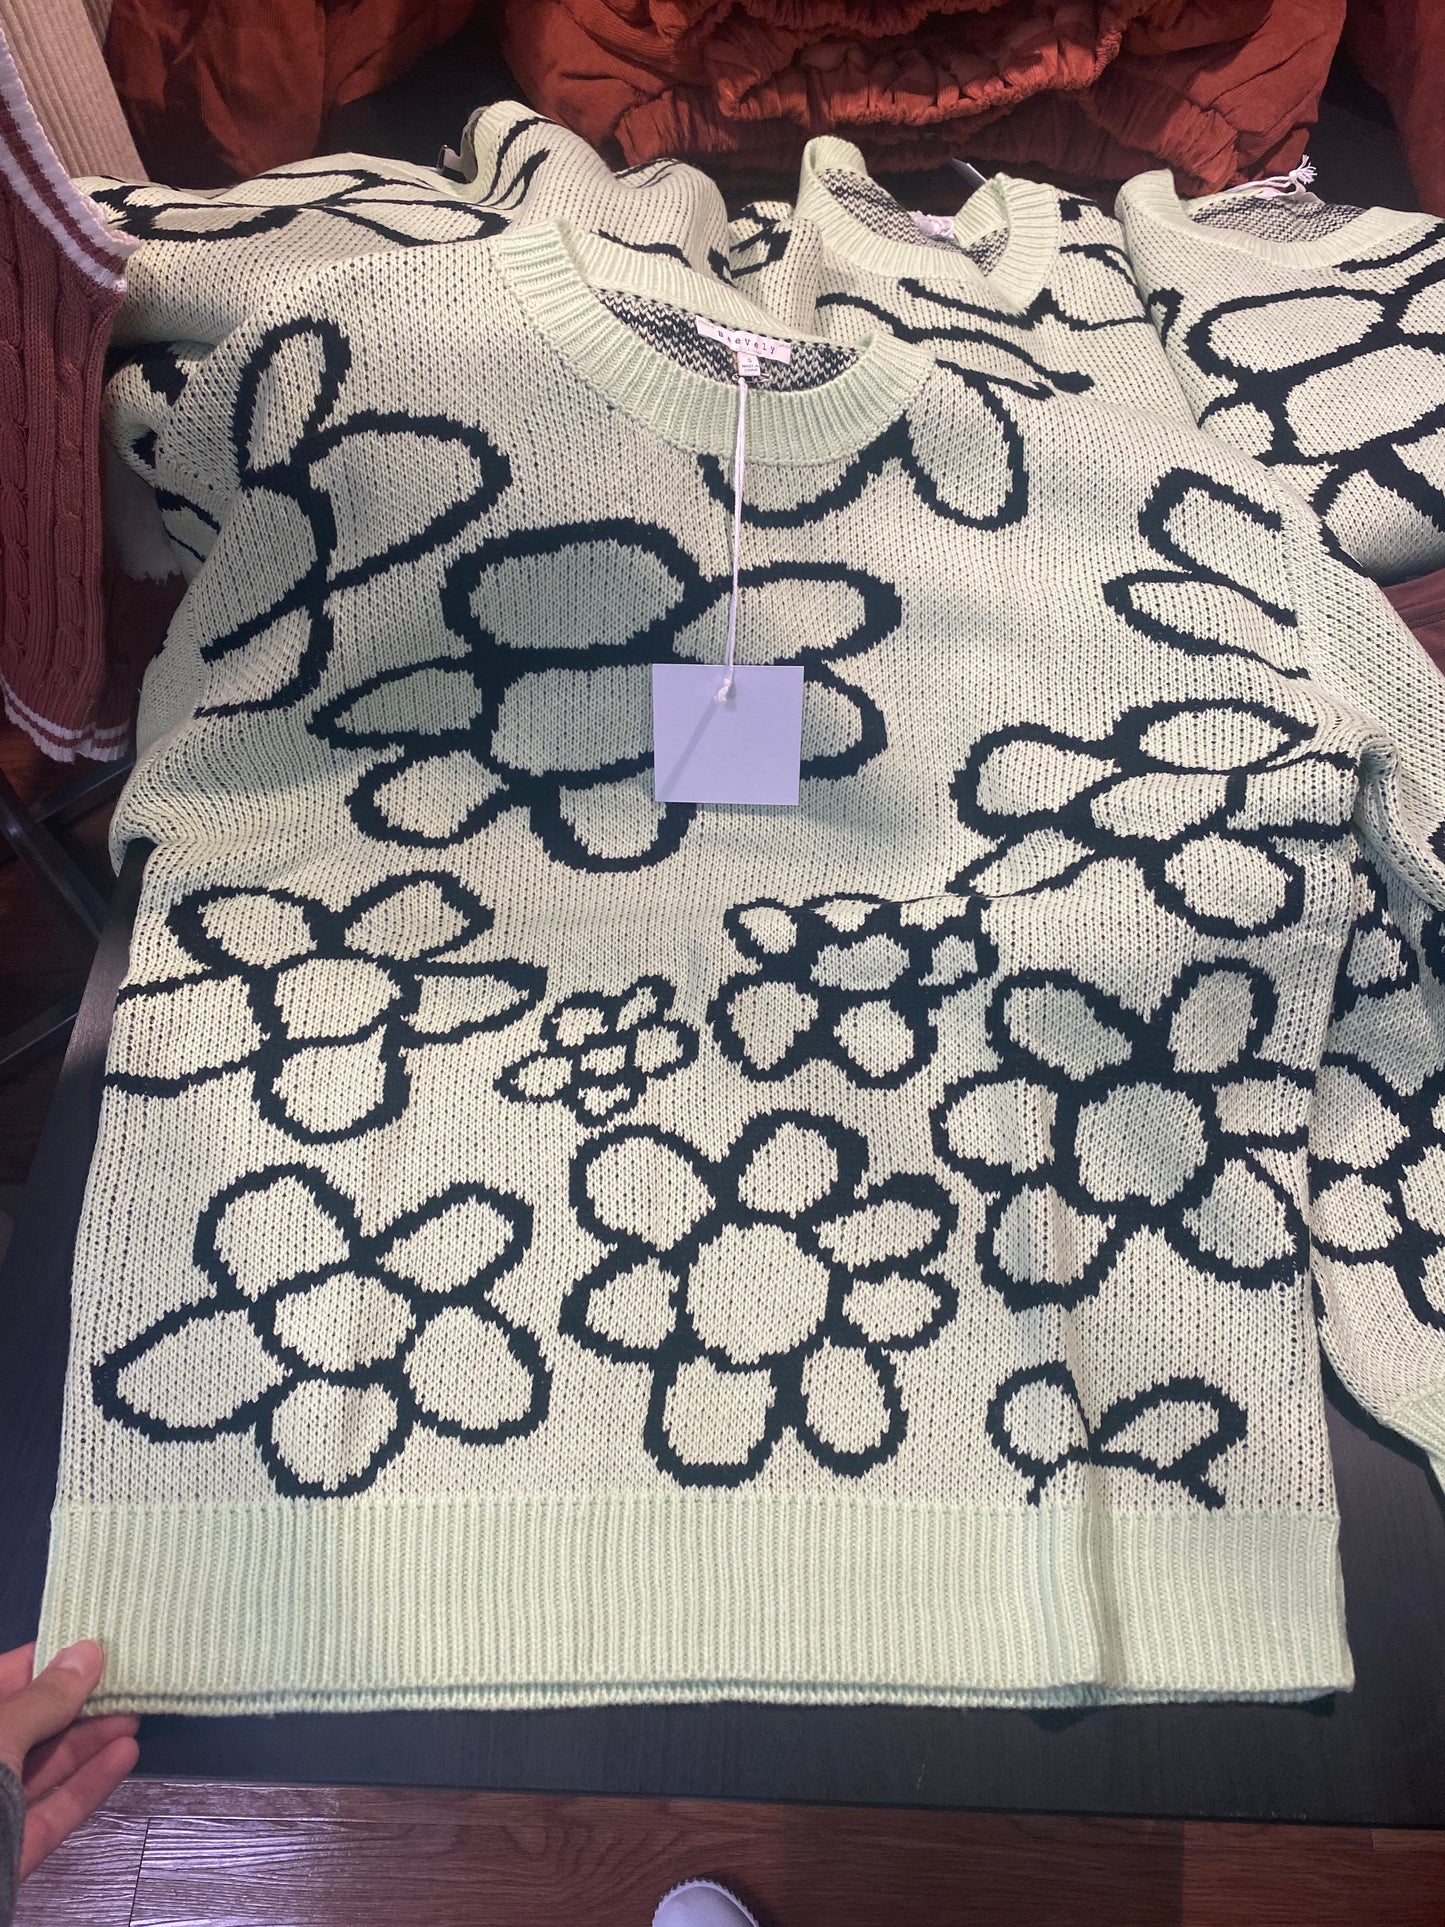 Floral Print Sweater - Baevely